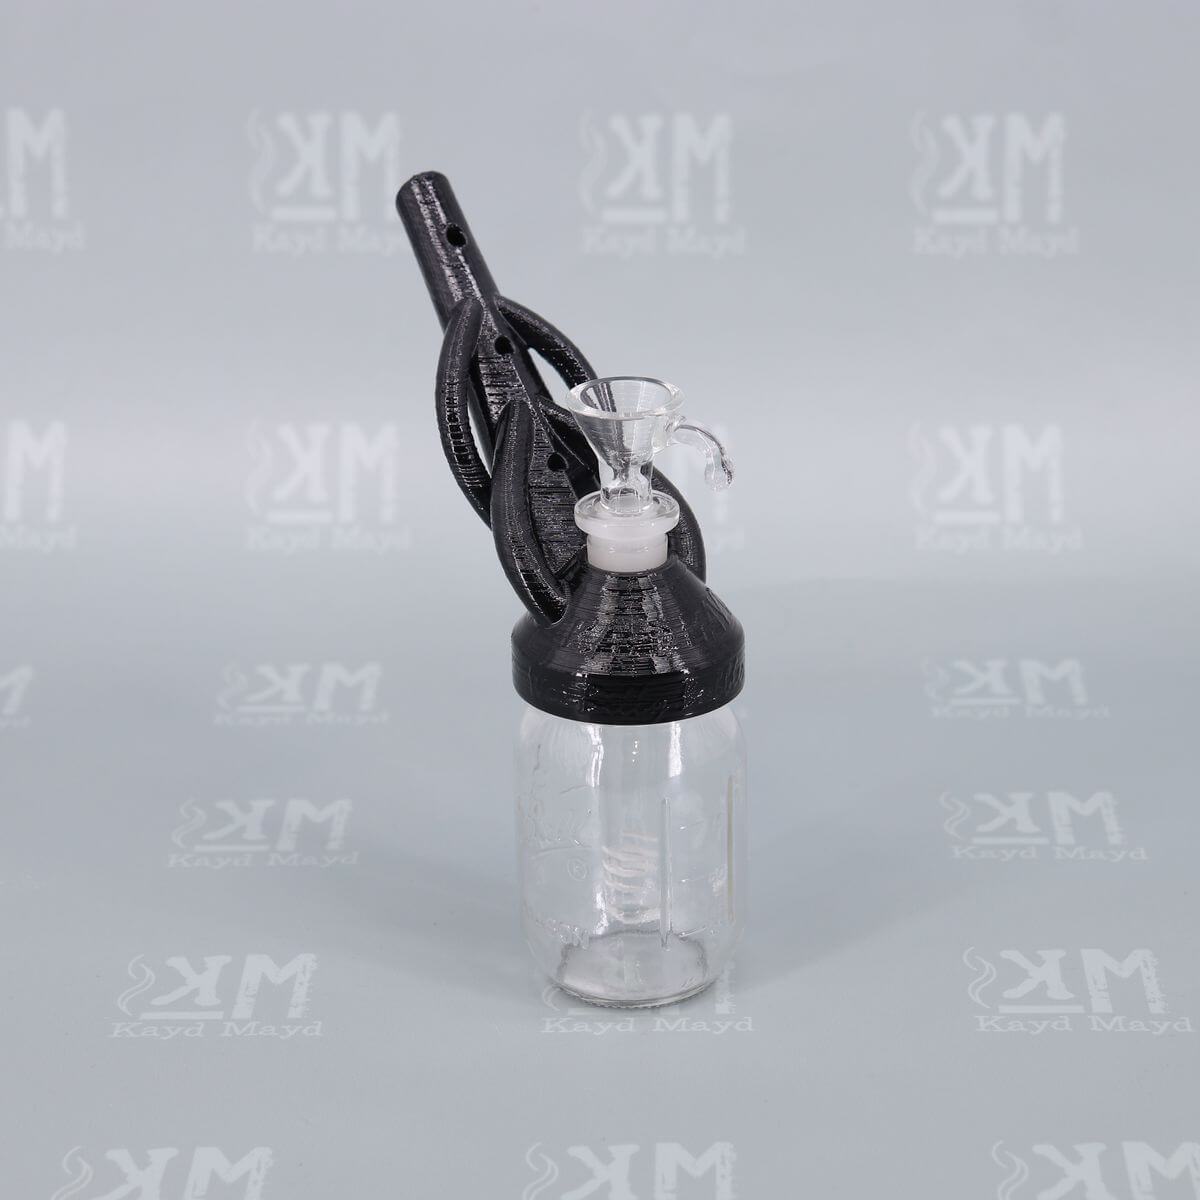 Black color of Wee Billy Bubbler No. 2 - Amazing 3D Printed Water Pipe by Kayd Mayd